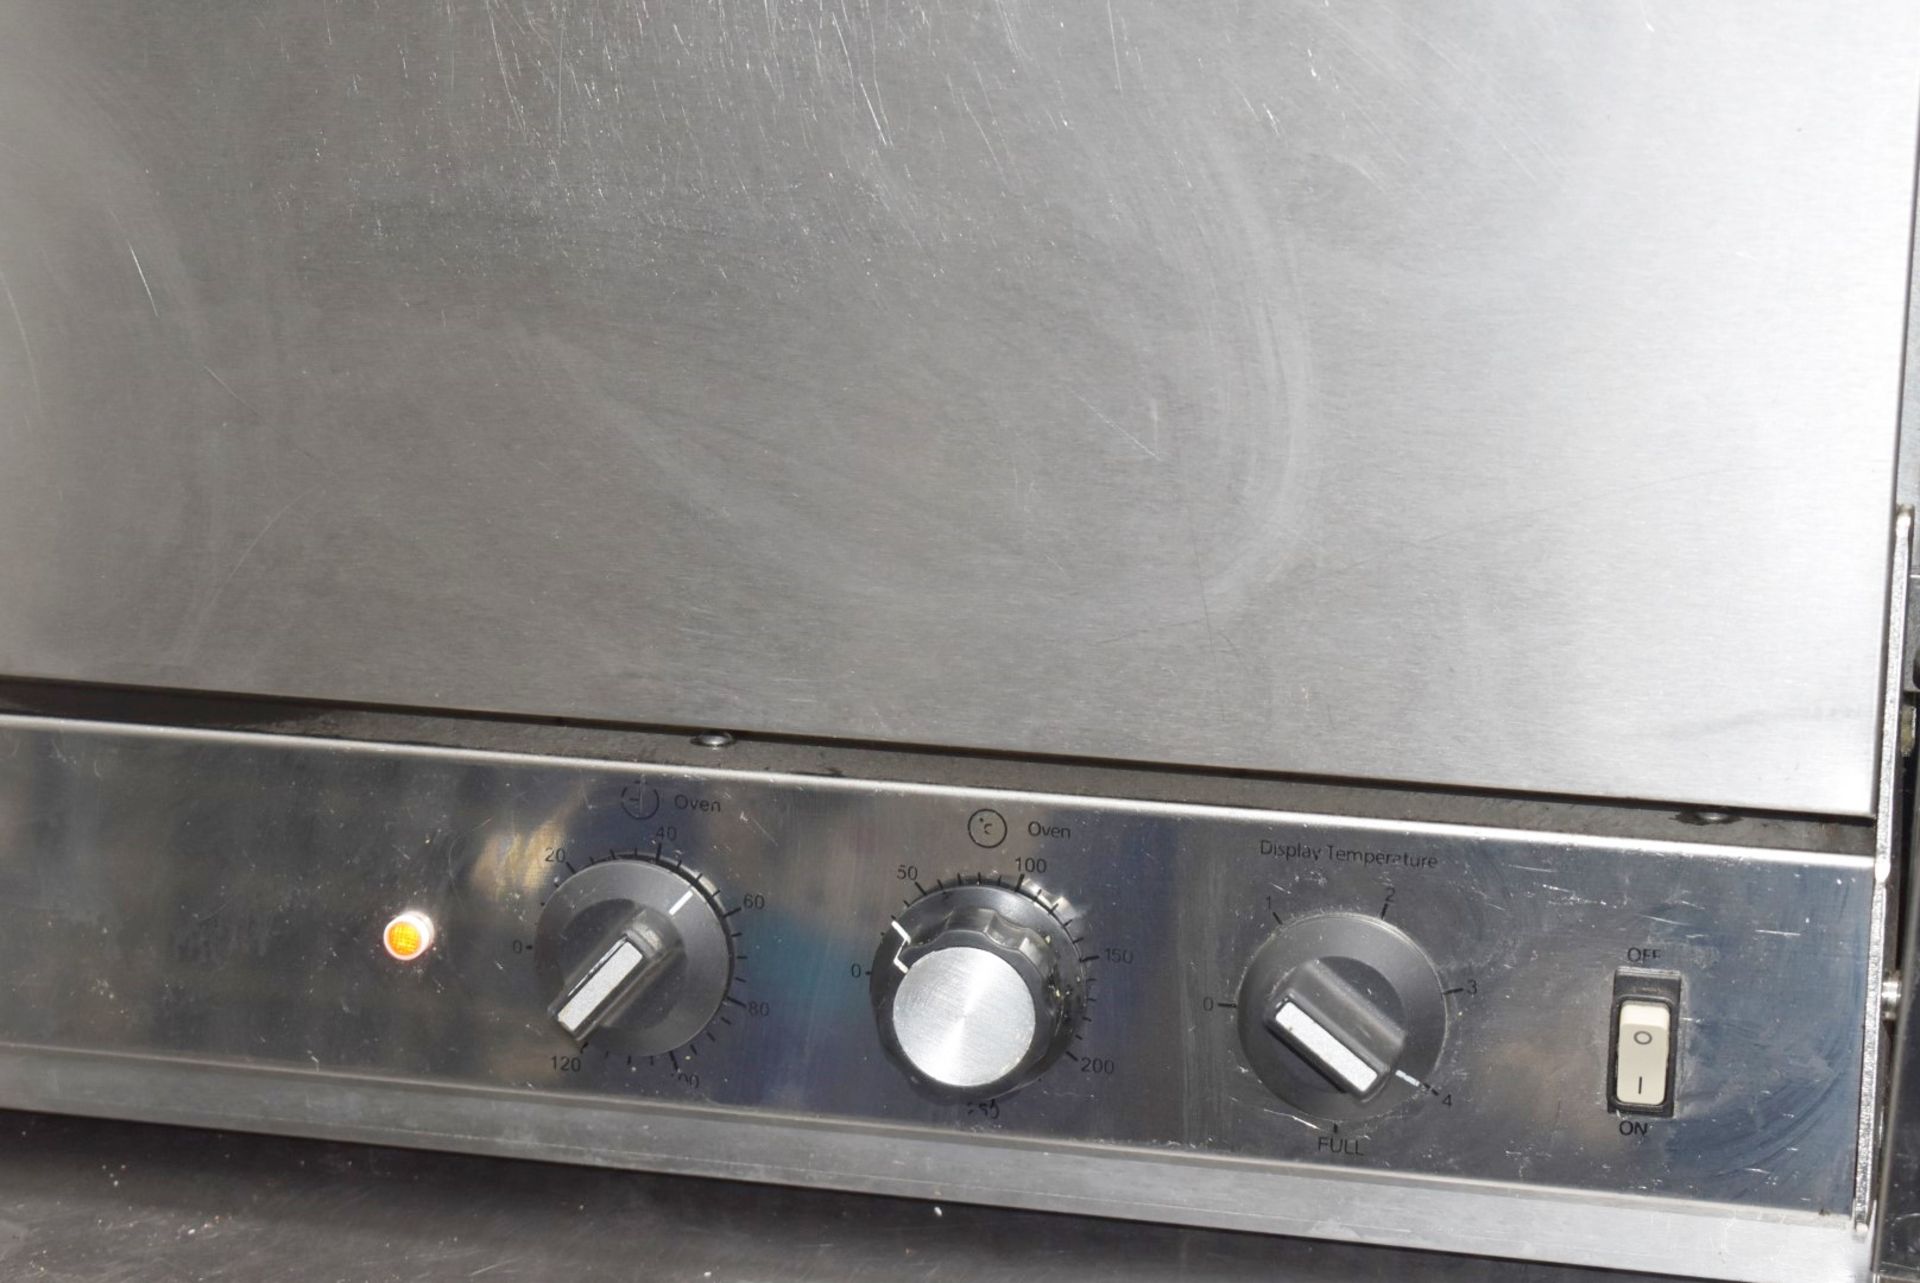 1 x Countertop Oven With Food Warmer Display - Dimensions: H63 x W55 x D56 cms - Recently Removed - Image 6 of 14